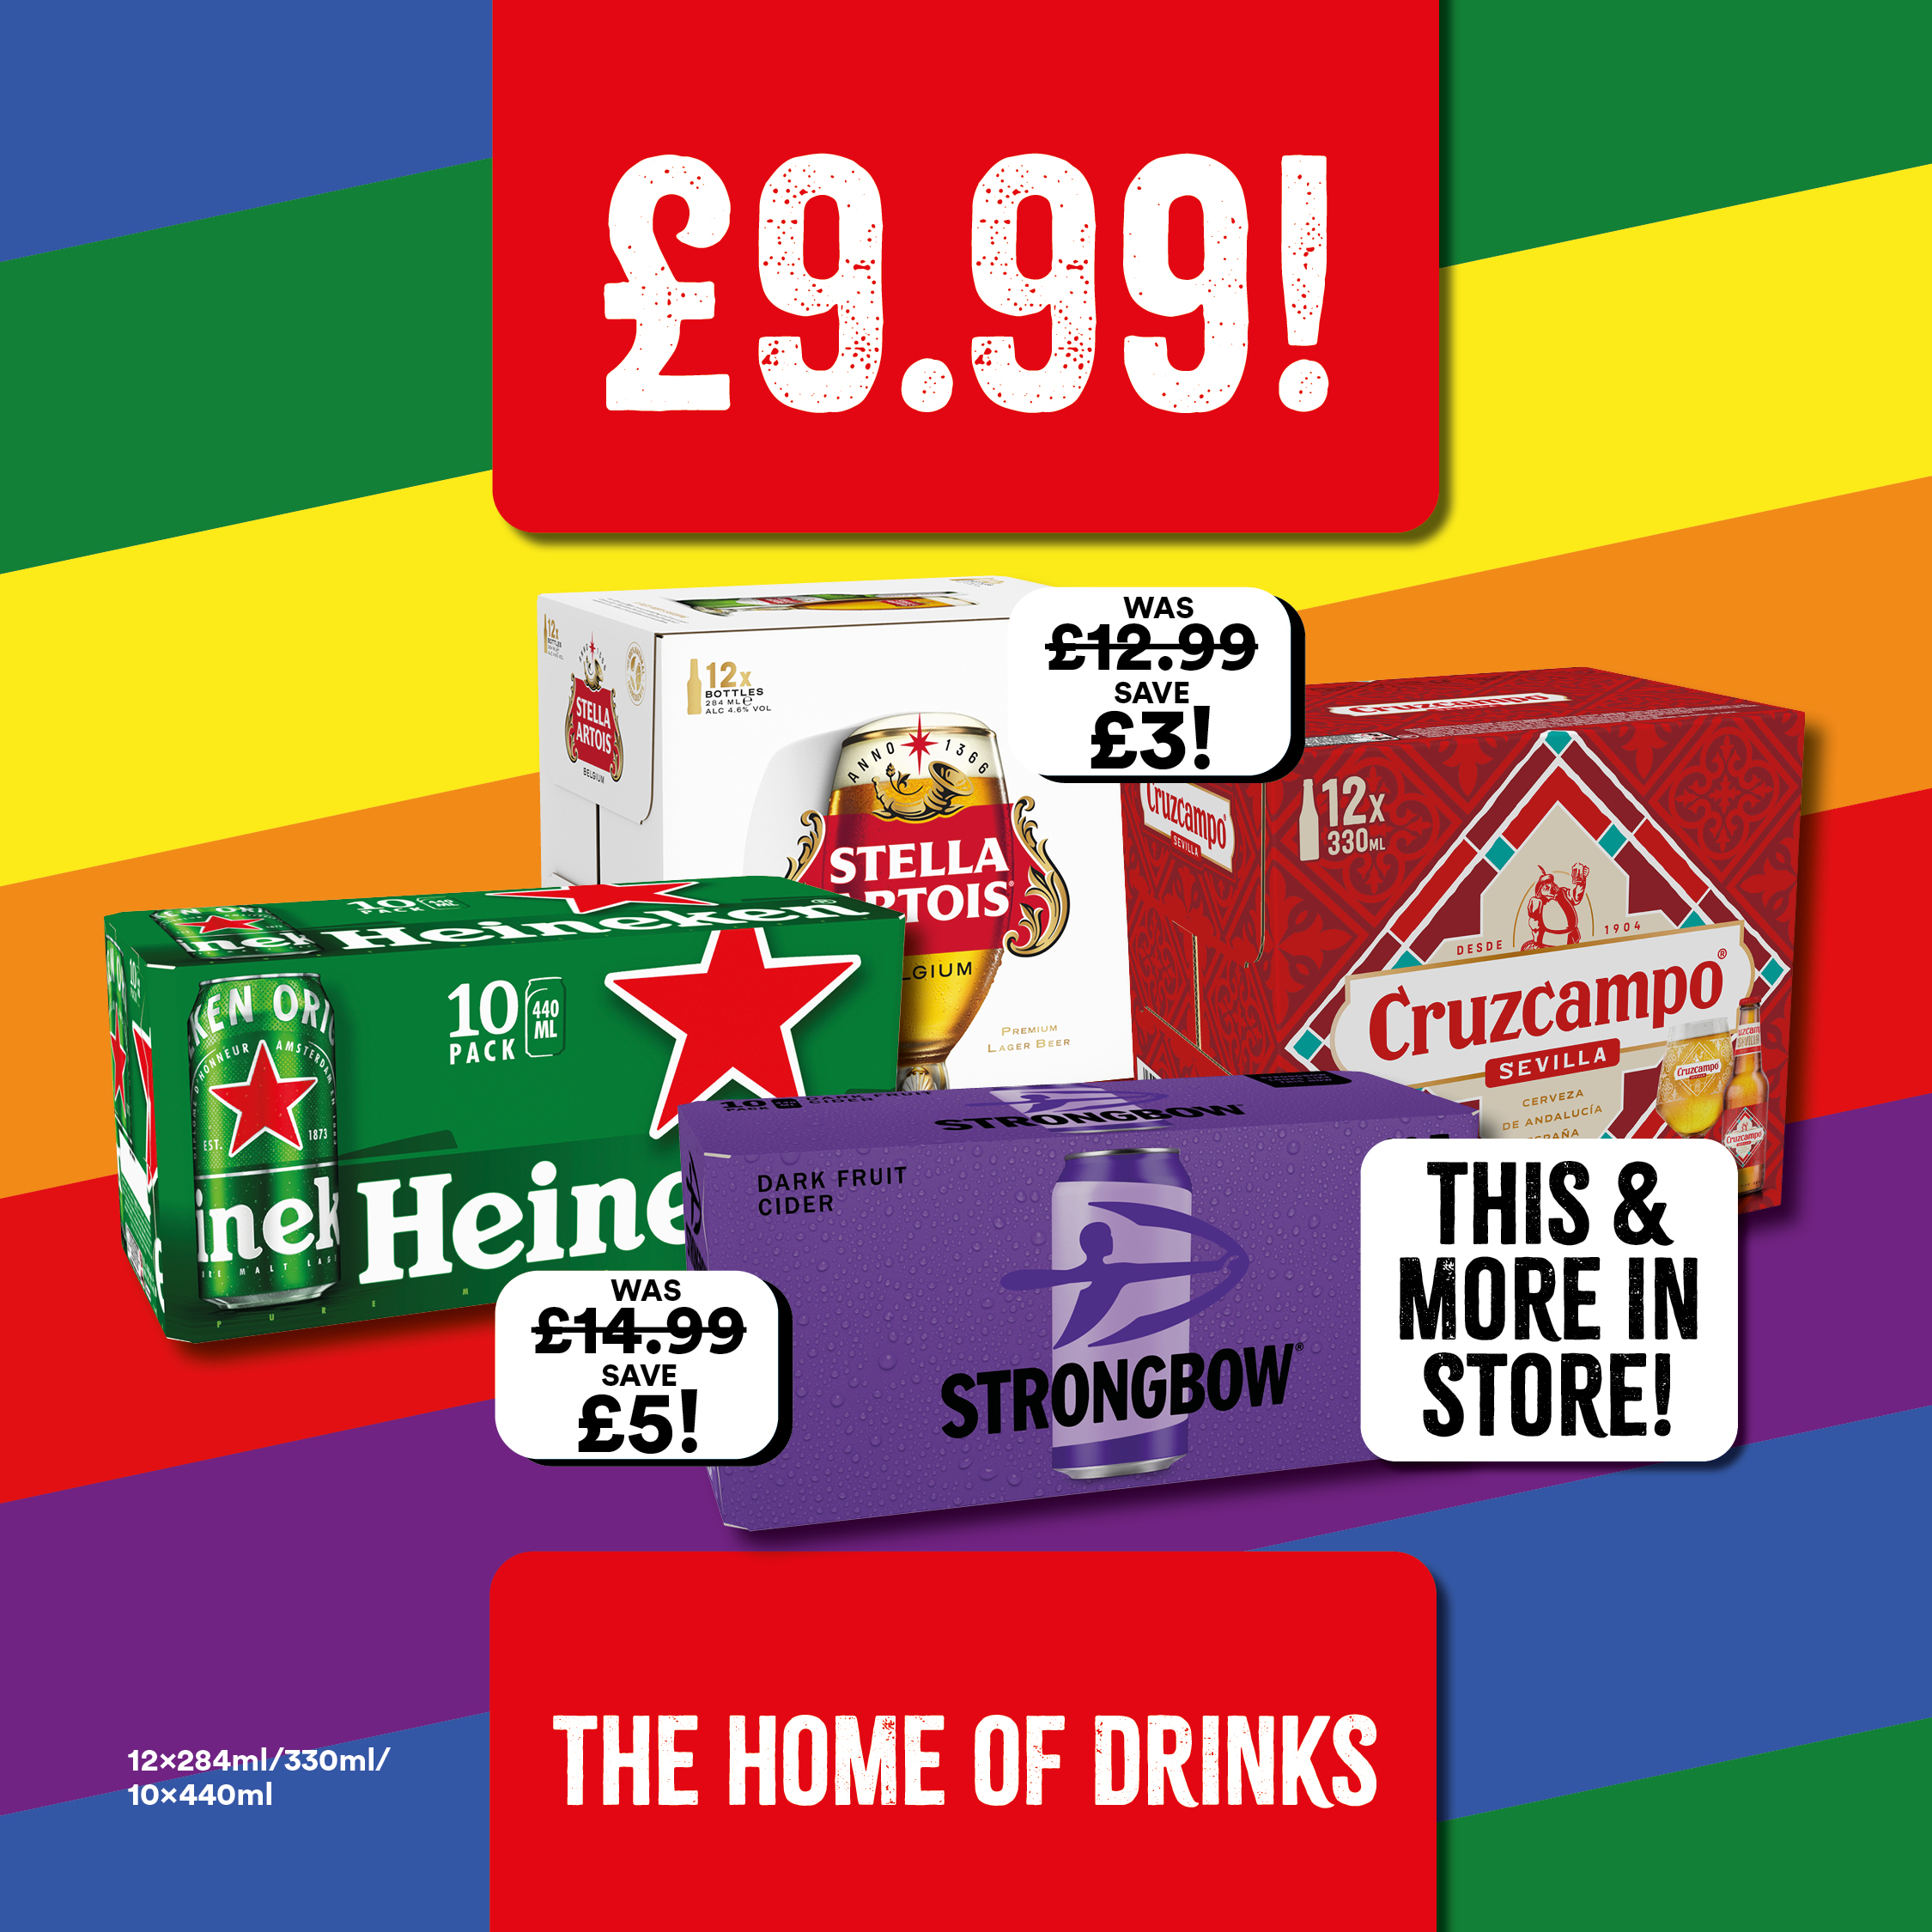 £9.99 on beer big packs Bargain Booze Select Convenience Wigan 01942 497130